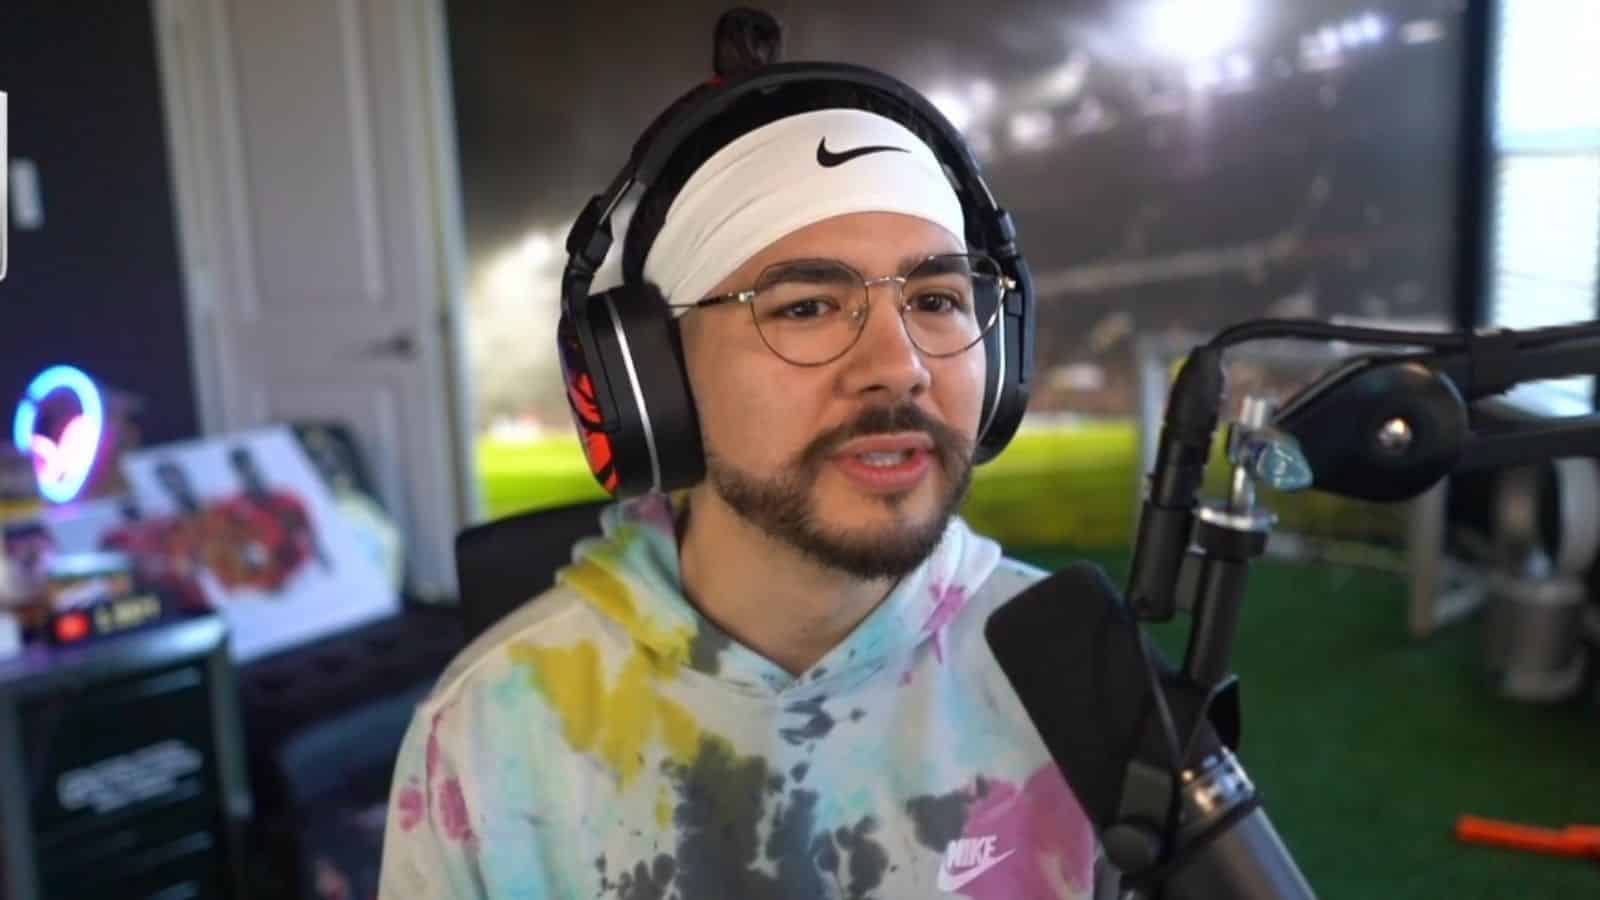 Castro1021 takes break from streaming as 95-year old grandma passes away